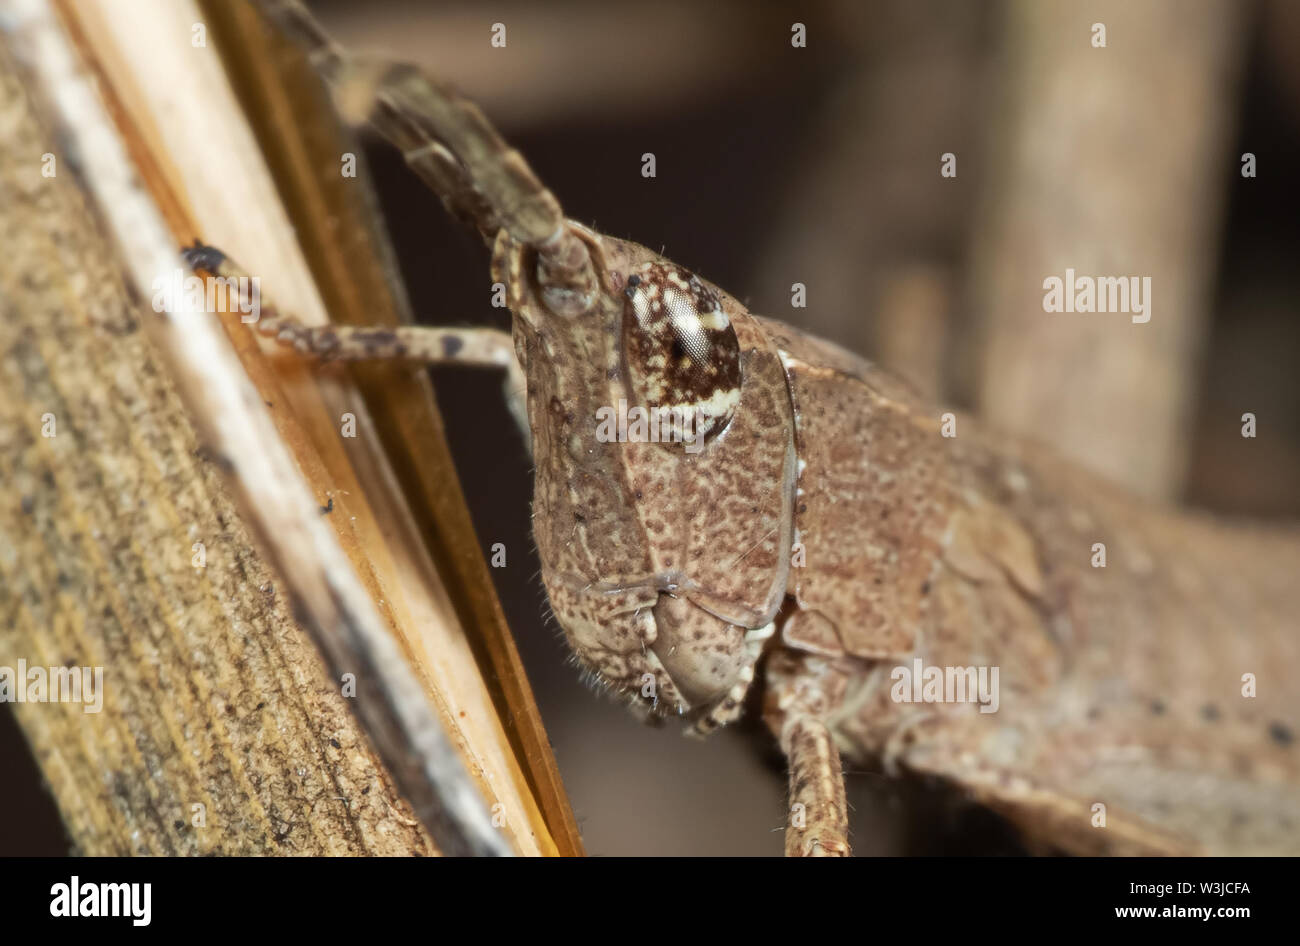 Macro Photography of Brown Grasshopper Camouflage on Twig, Selective Focus Stock Photo